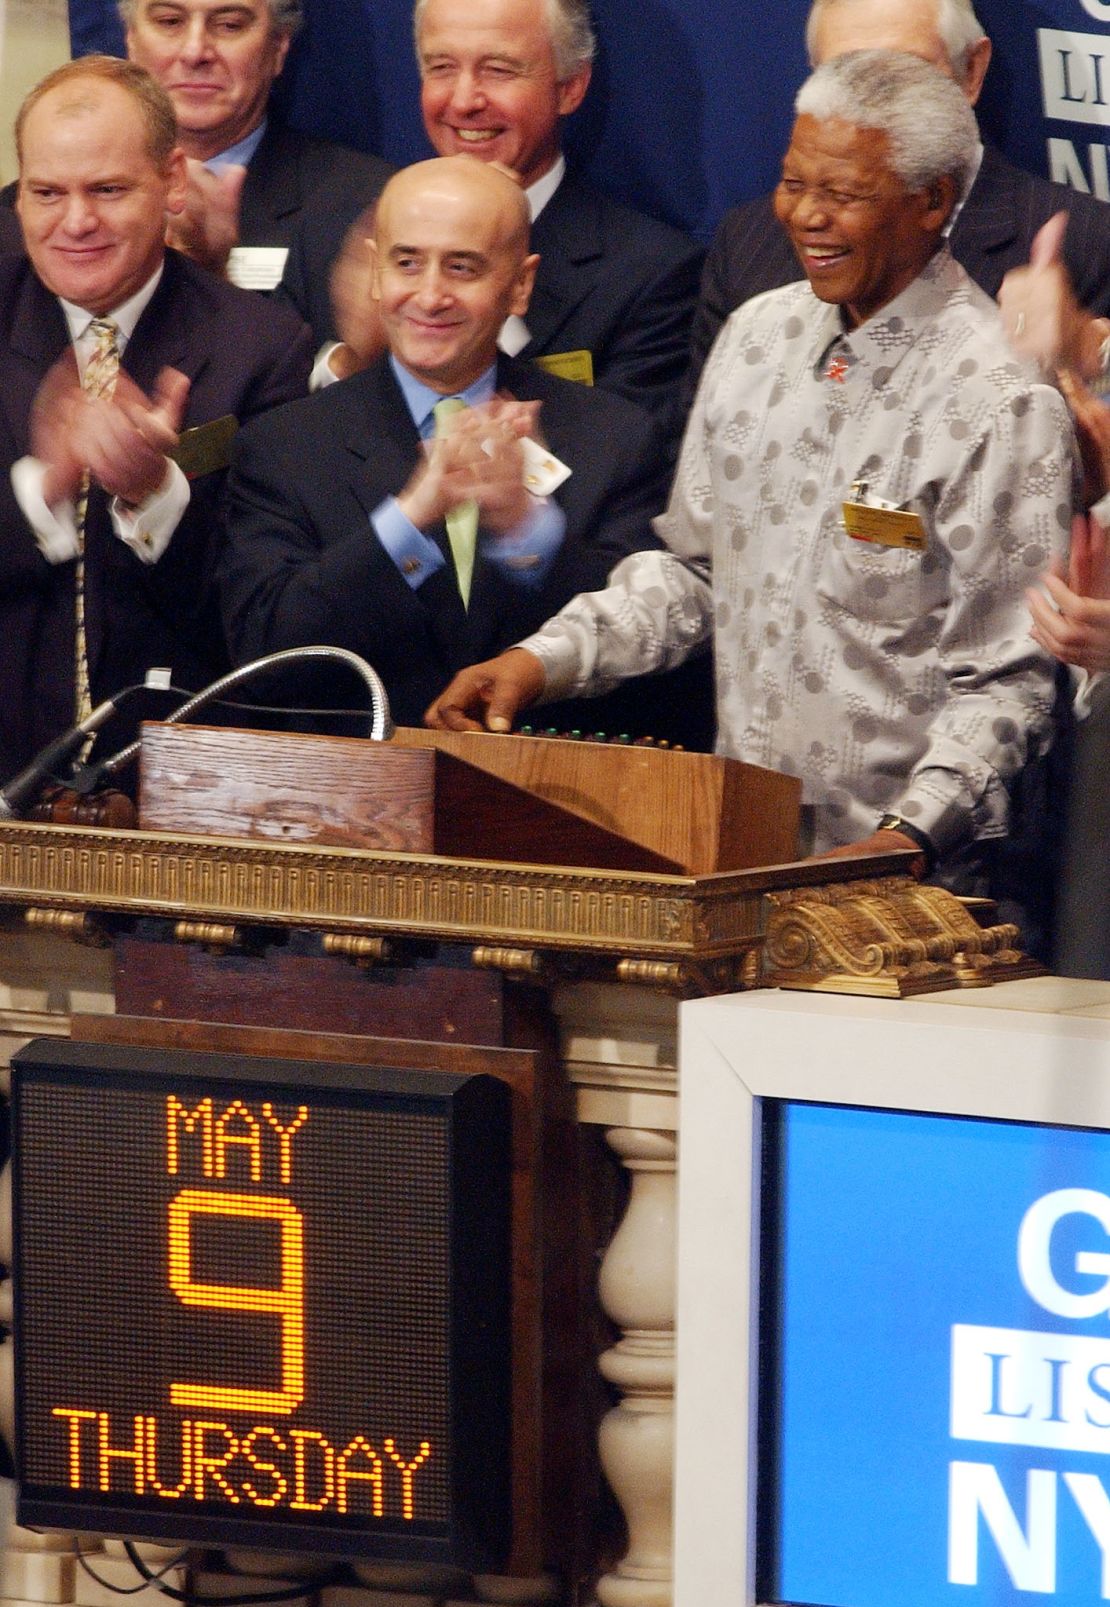 Former South African President Nelson Mandela (R) rings ringing the opening bell at the New York Stock Exchange May 9, 2002 in New York as NYSE Chairman Richard Grasso (C) applauds.